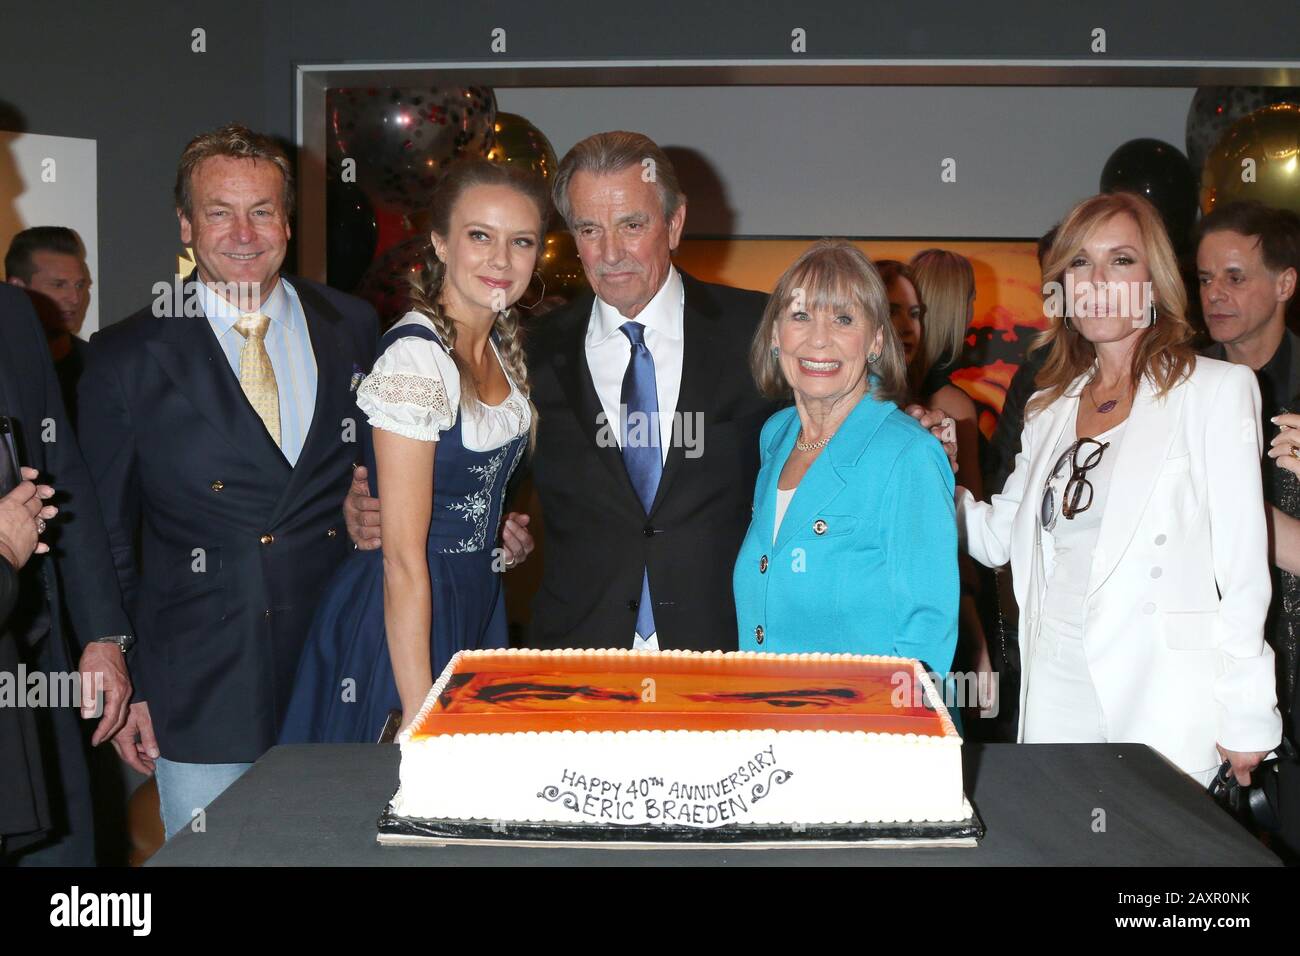 February 7, 2020, Los Angeles, CA, USA: LOS ANGELES - FEB 7:  Doug Davidson, Melissa Ordway, Eric Braeden, Marla Adams, Tracey Bregman at the Eric Braeden 40th Anniversary Celebration on The Young and The Restless at the Television City on February 7, 2020 in Los Angeles, CA (Credit Image: © Kay Blake/ZUMA Wire) Stock Photo